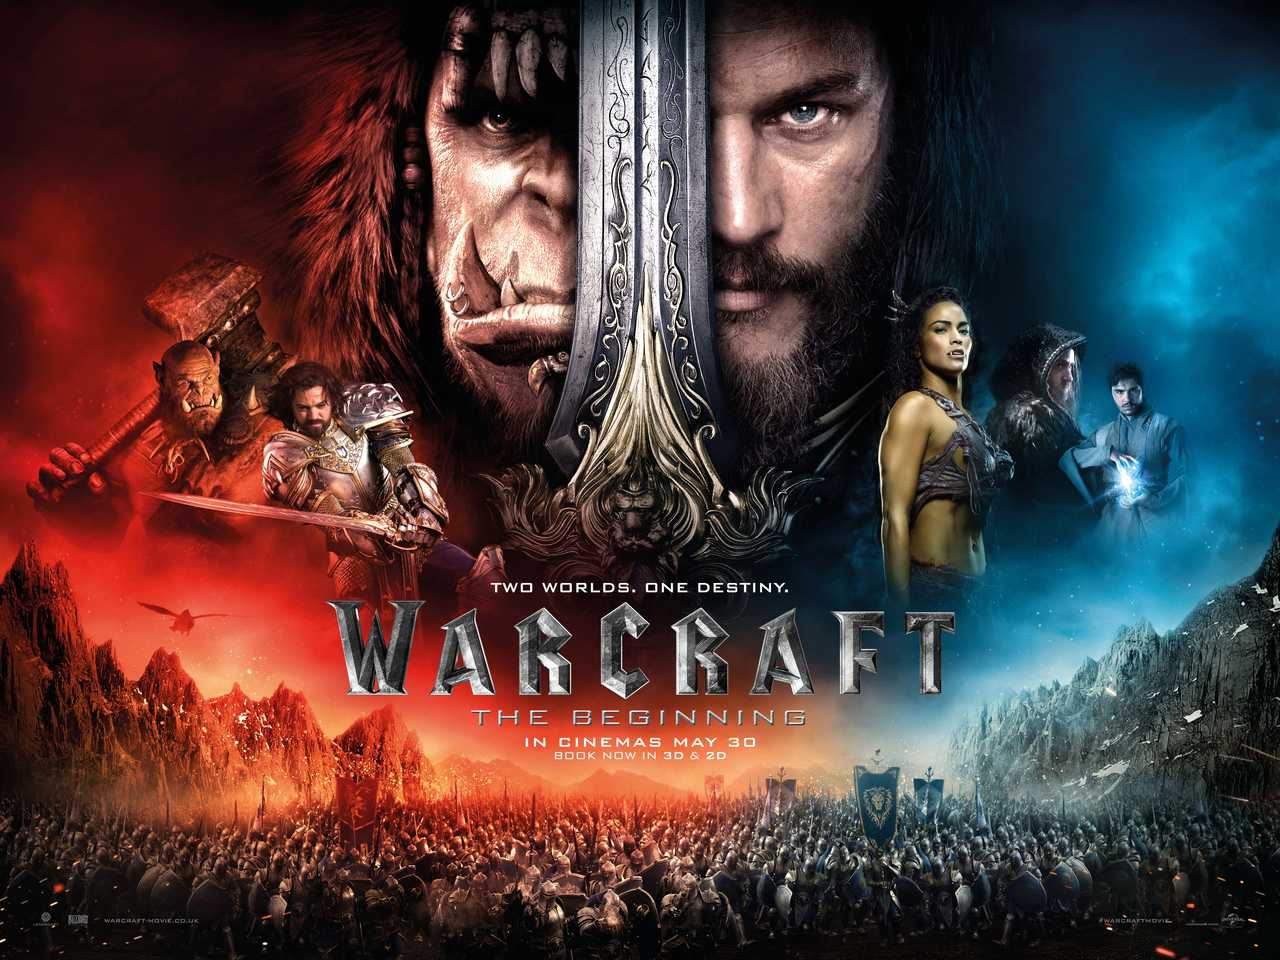 WarCraft, the most successful video game film adaptation